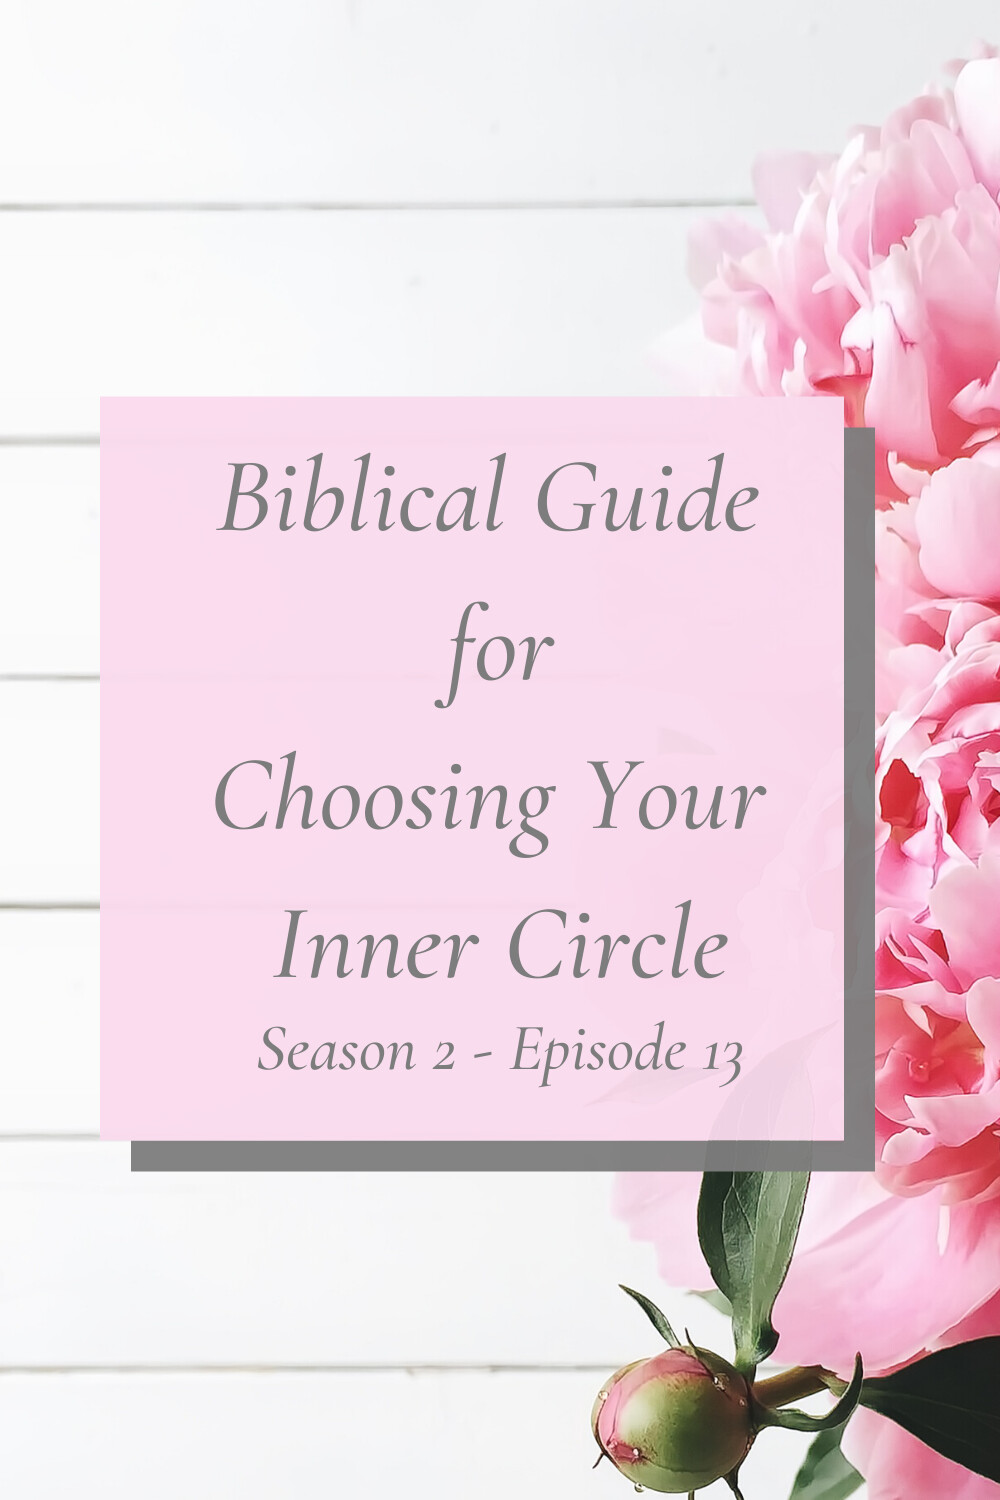 Biblical Guide for Choosing Your Inner Circle